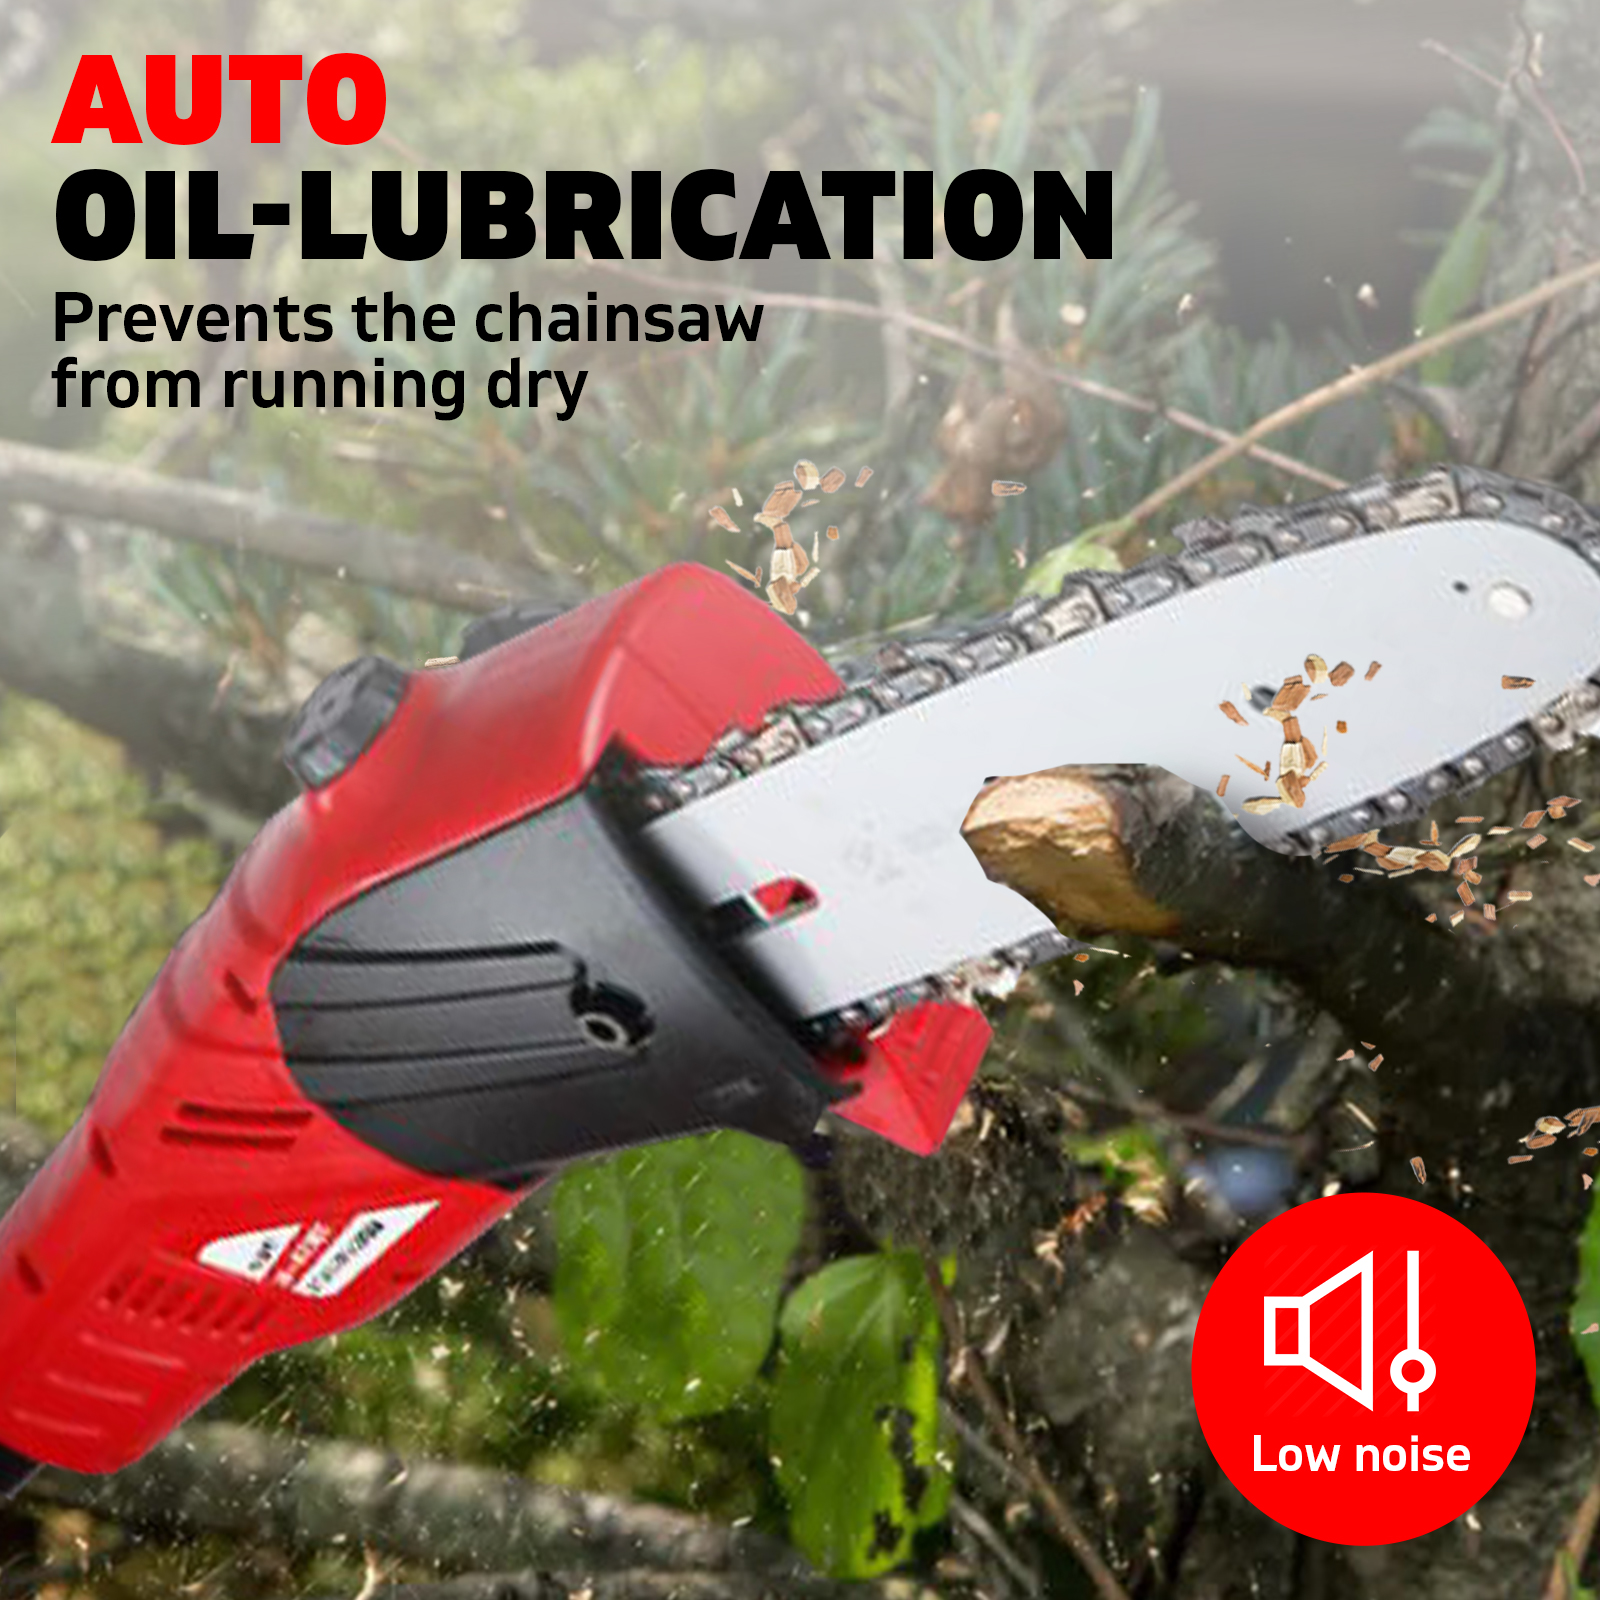 20V 1500mAh Lithium Cordless Electric Chainsaw Compact 8”bar and chain